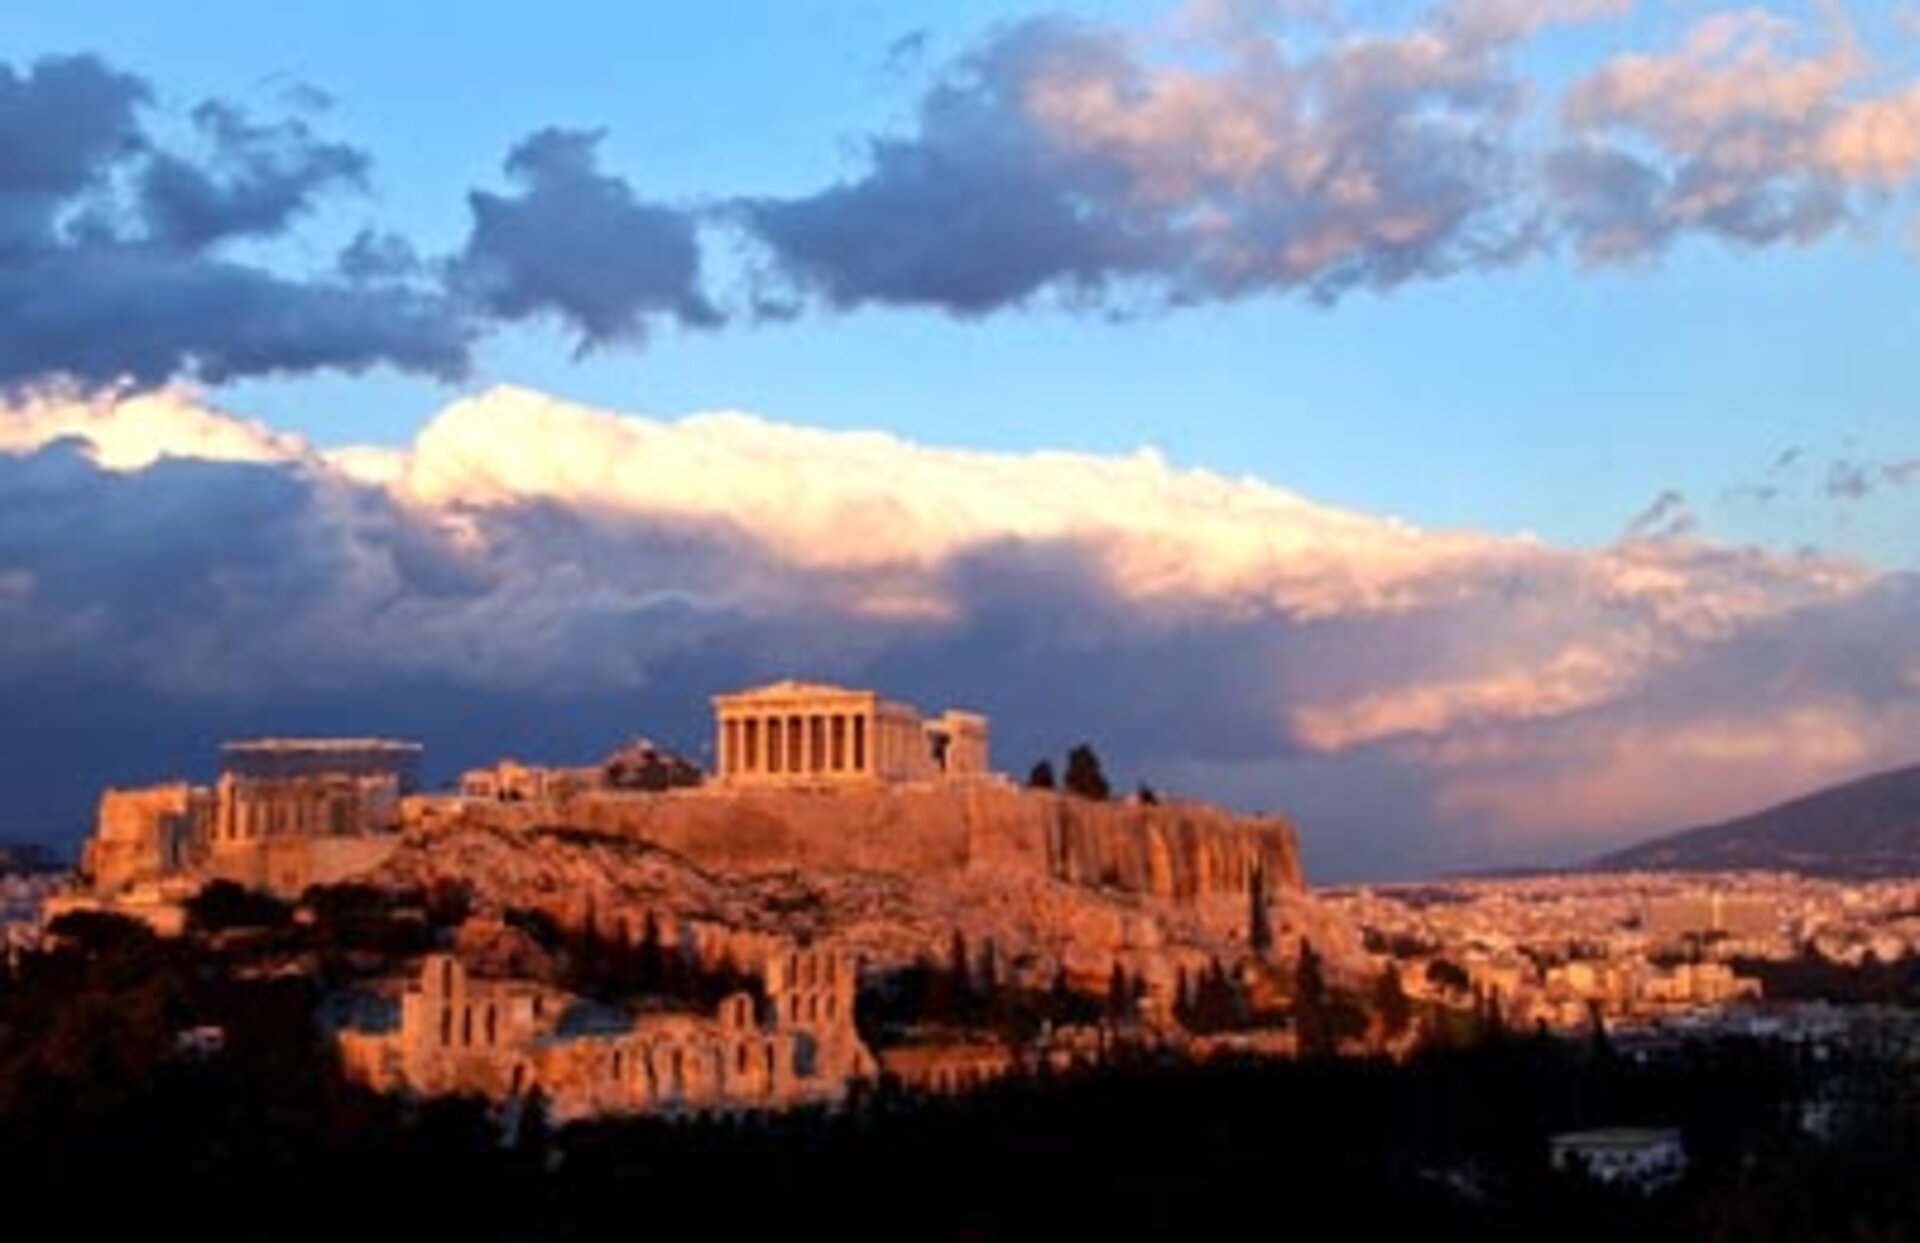 The ancient Acropolis in Athens